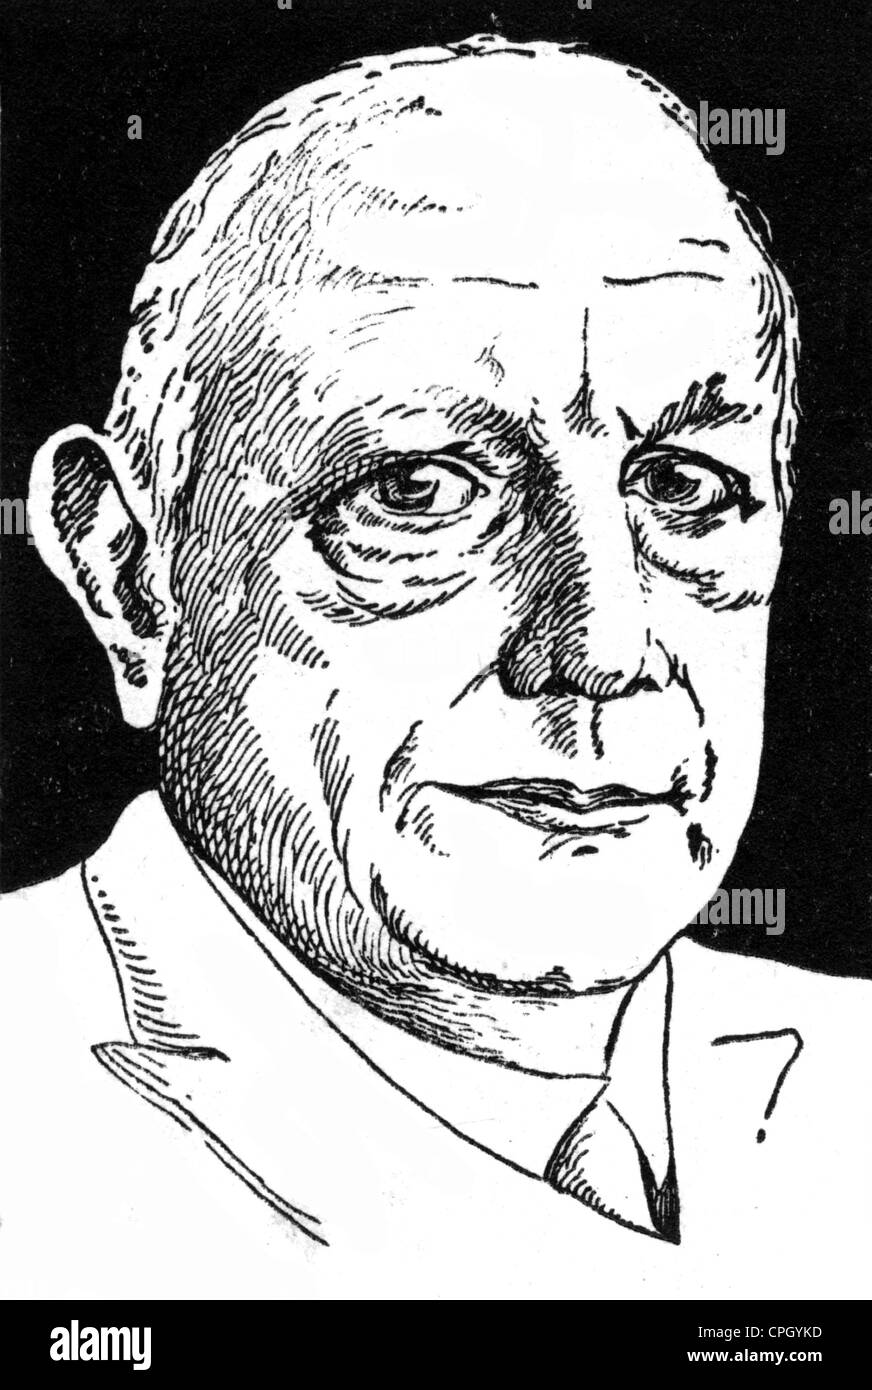 Messter, Oskar, 22.11.1866 - 7.12.1943, German scientist, inventor of the film projector, portrait, drawing, circa 1930s, Stock Photo